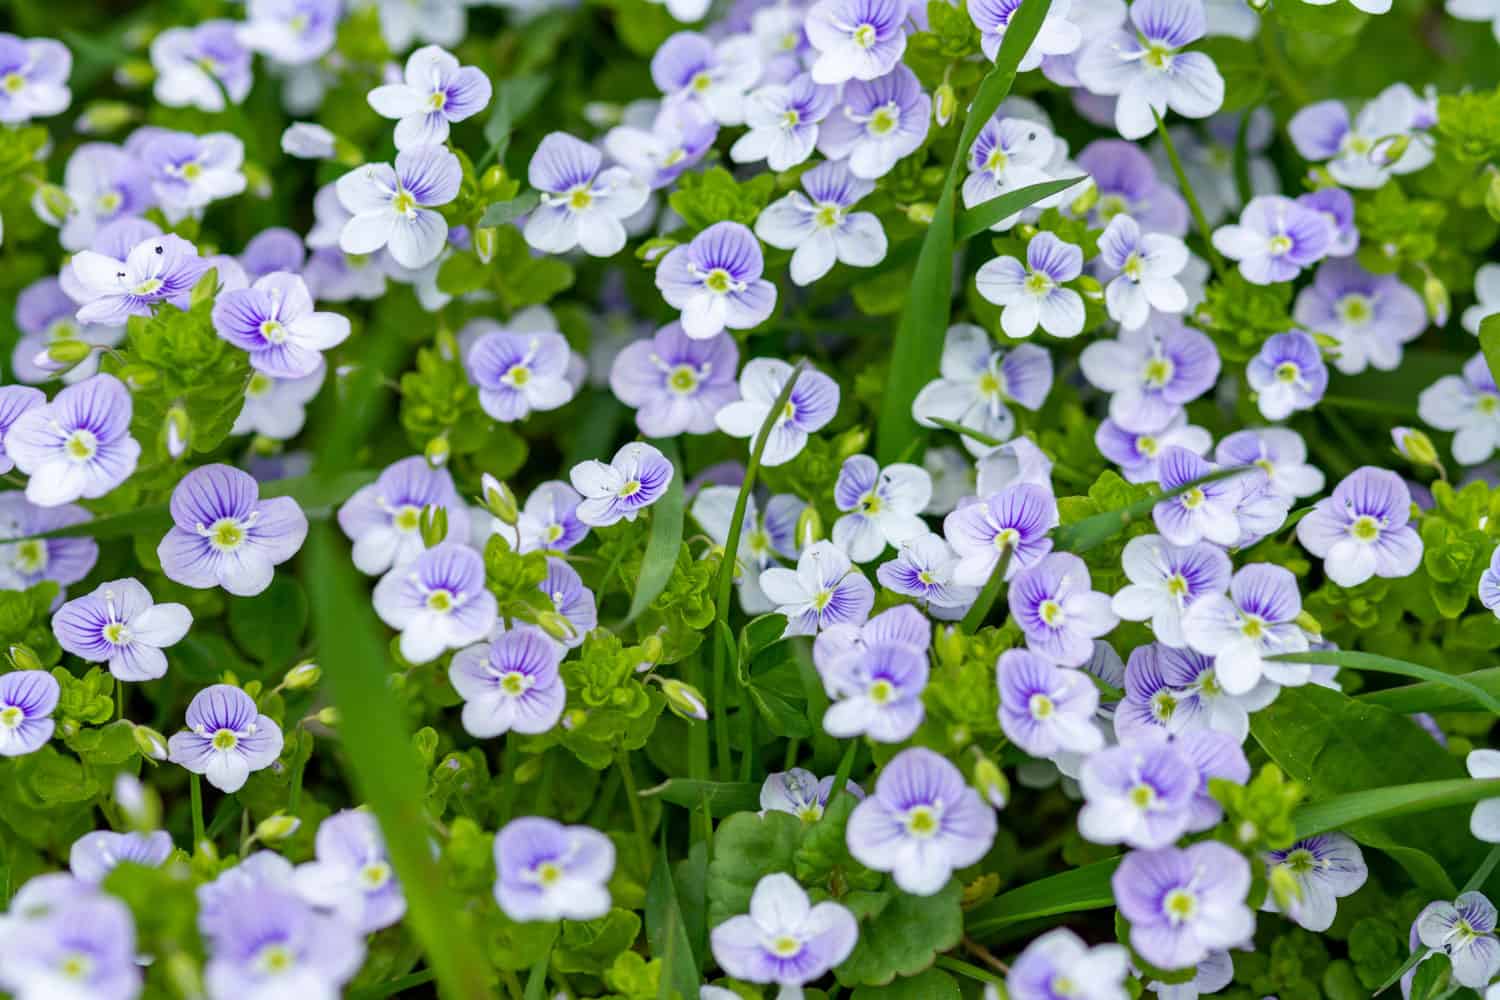 Blooming white petals of a speedwell plant